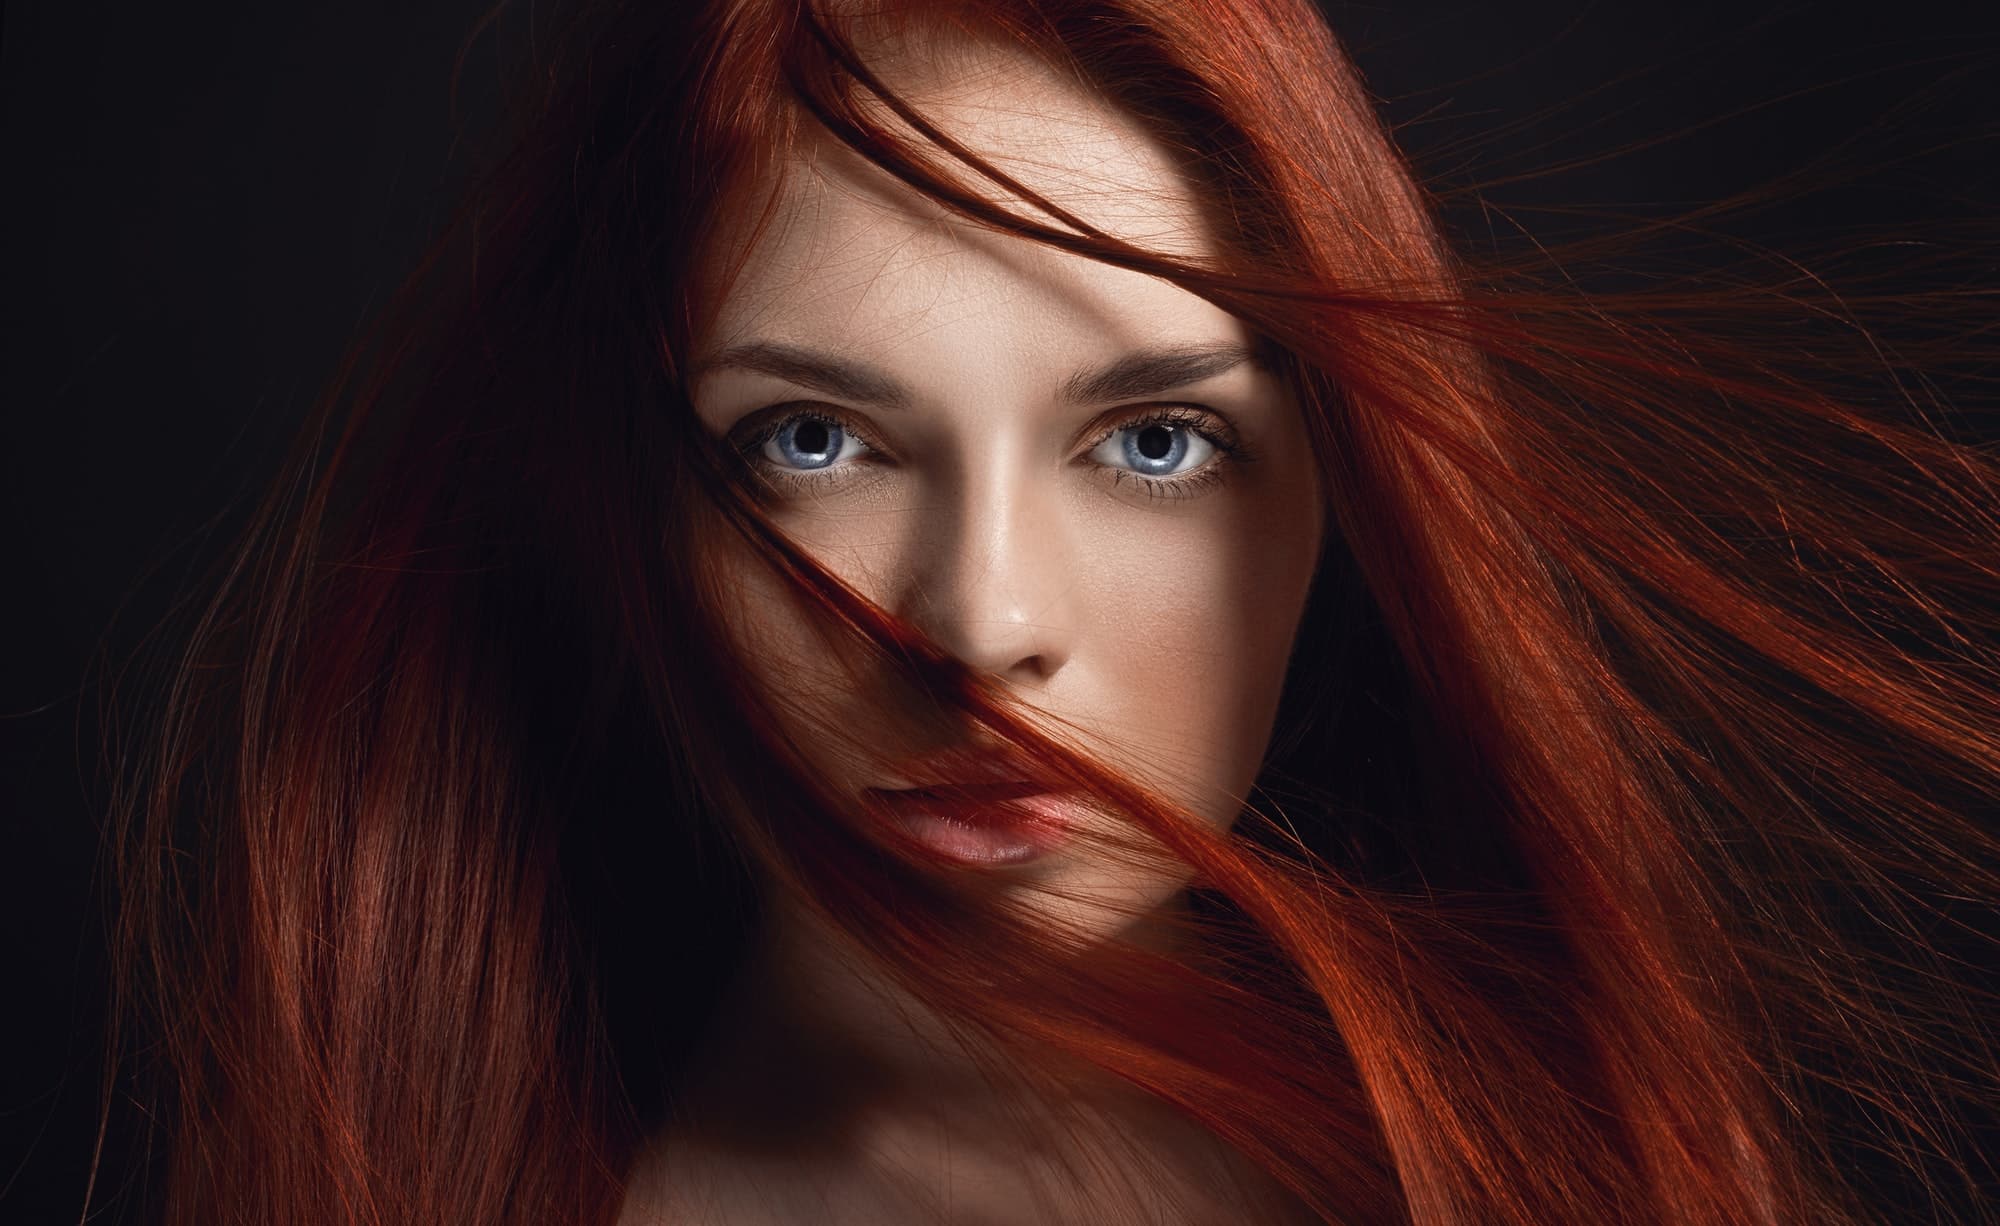 Sexy beautiful redhead girl with long hair. Perfect woman portrait on black background. Gorgeous